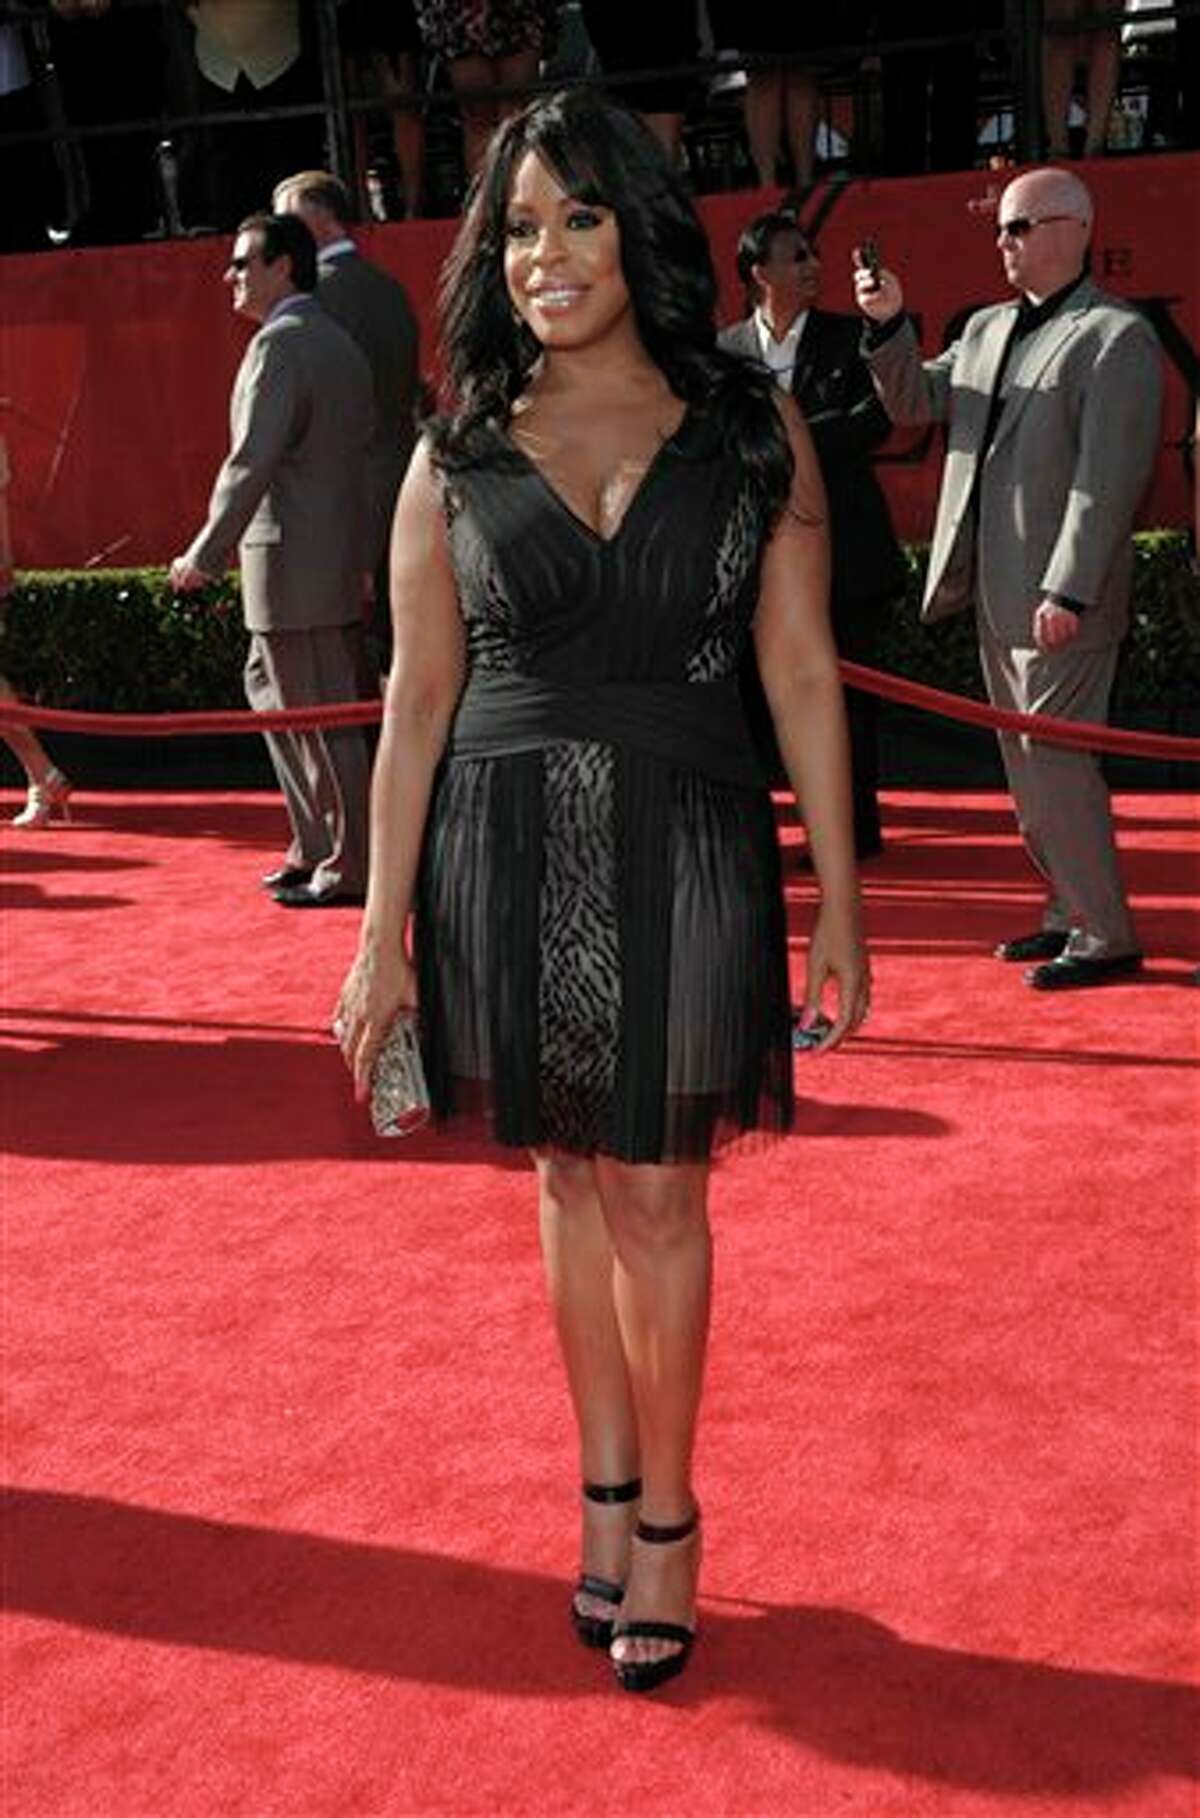 Comedian Niecy Nash arrives at the ESPY awards on Wednesday, July 13, 2011, in Los Angeles. (AP Photo/Dan Steinberg)